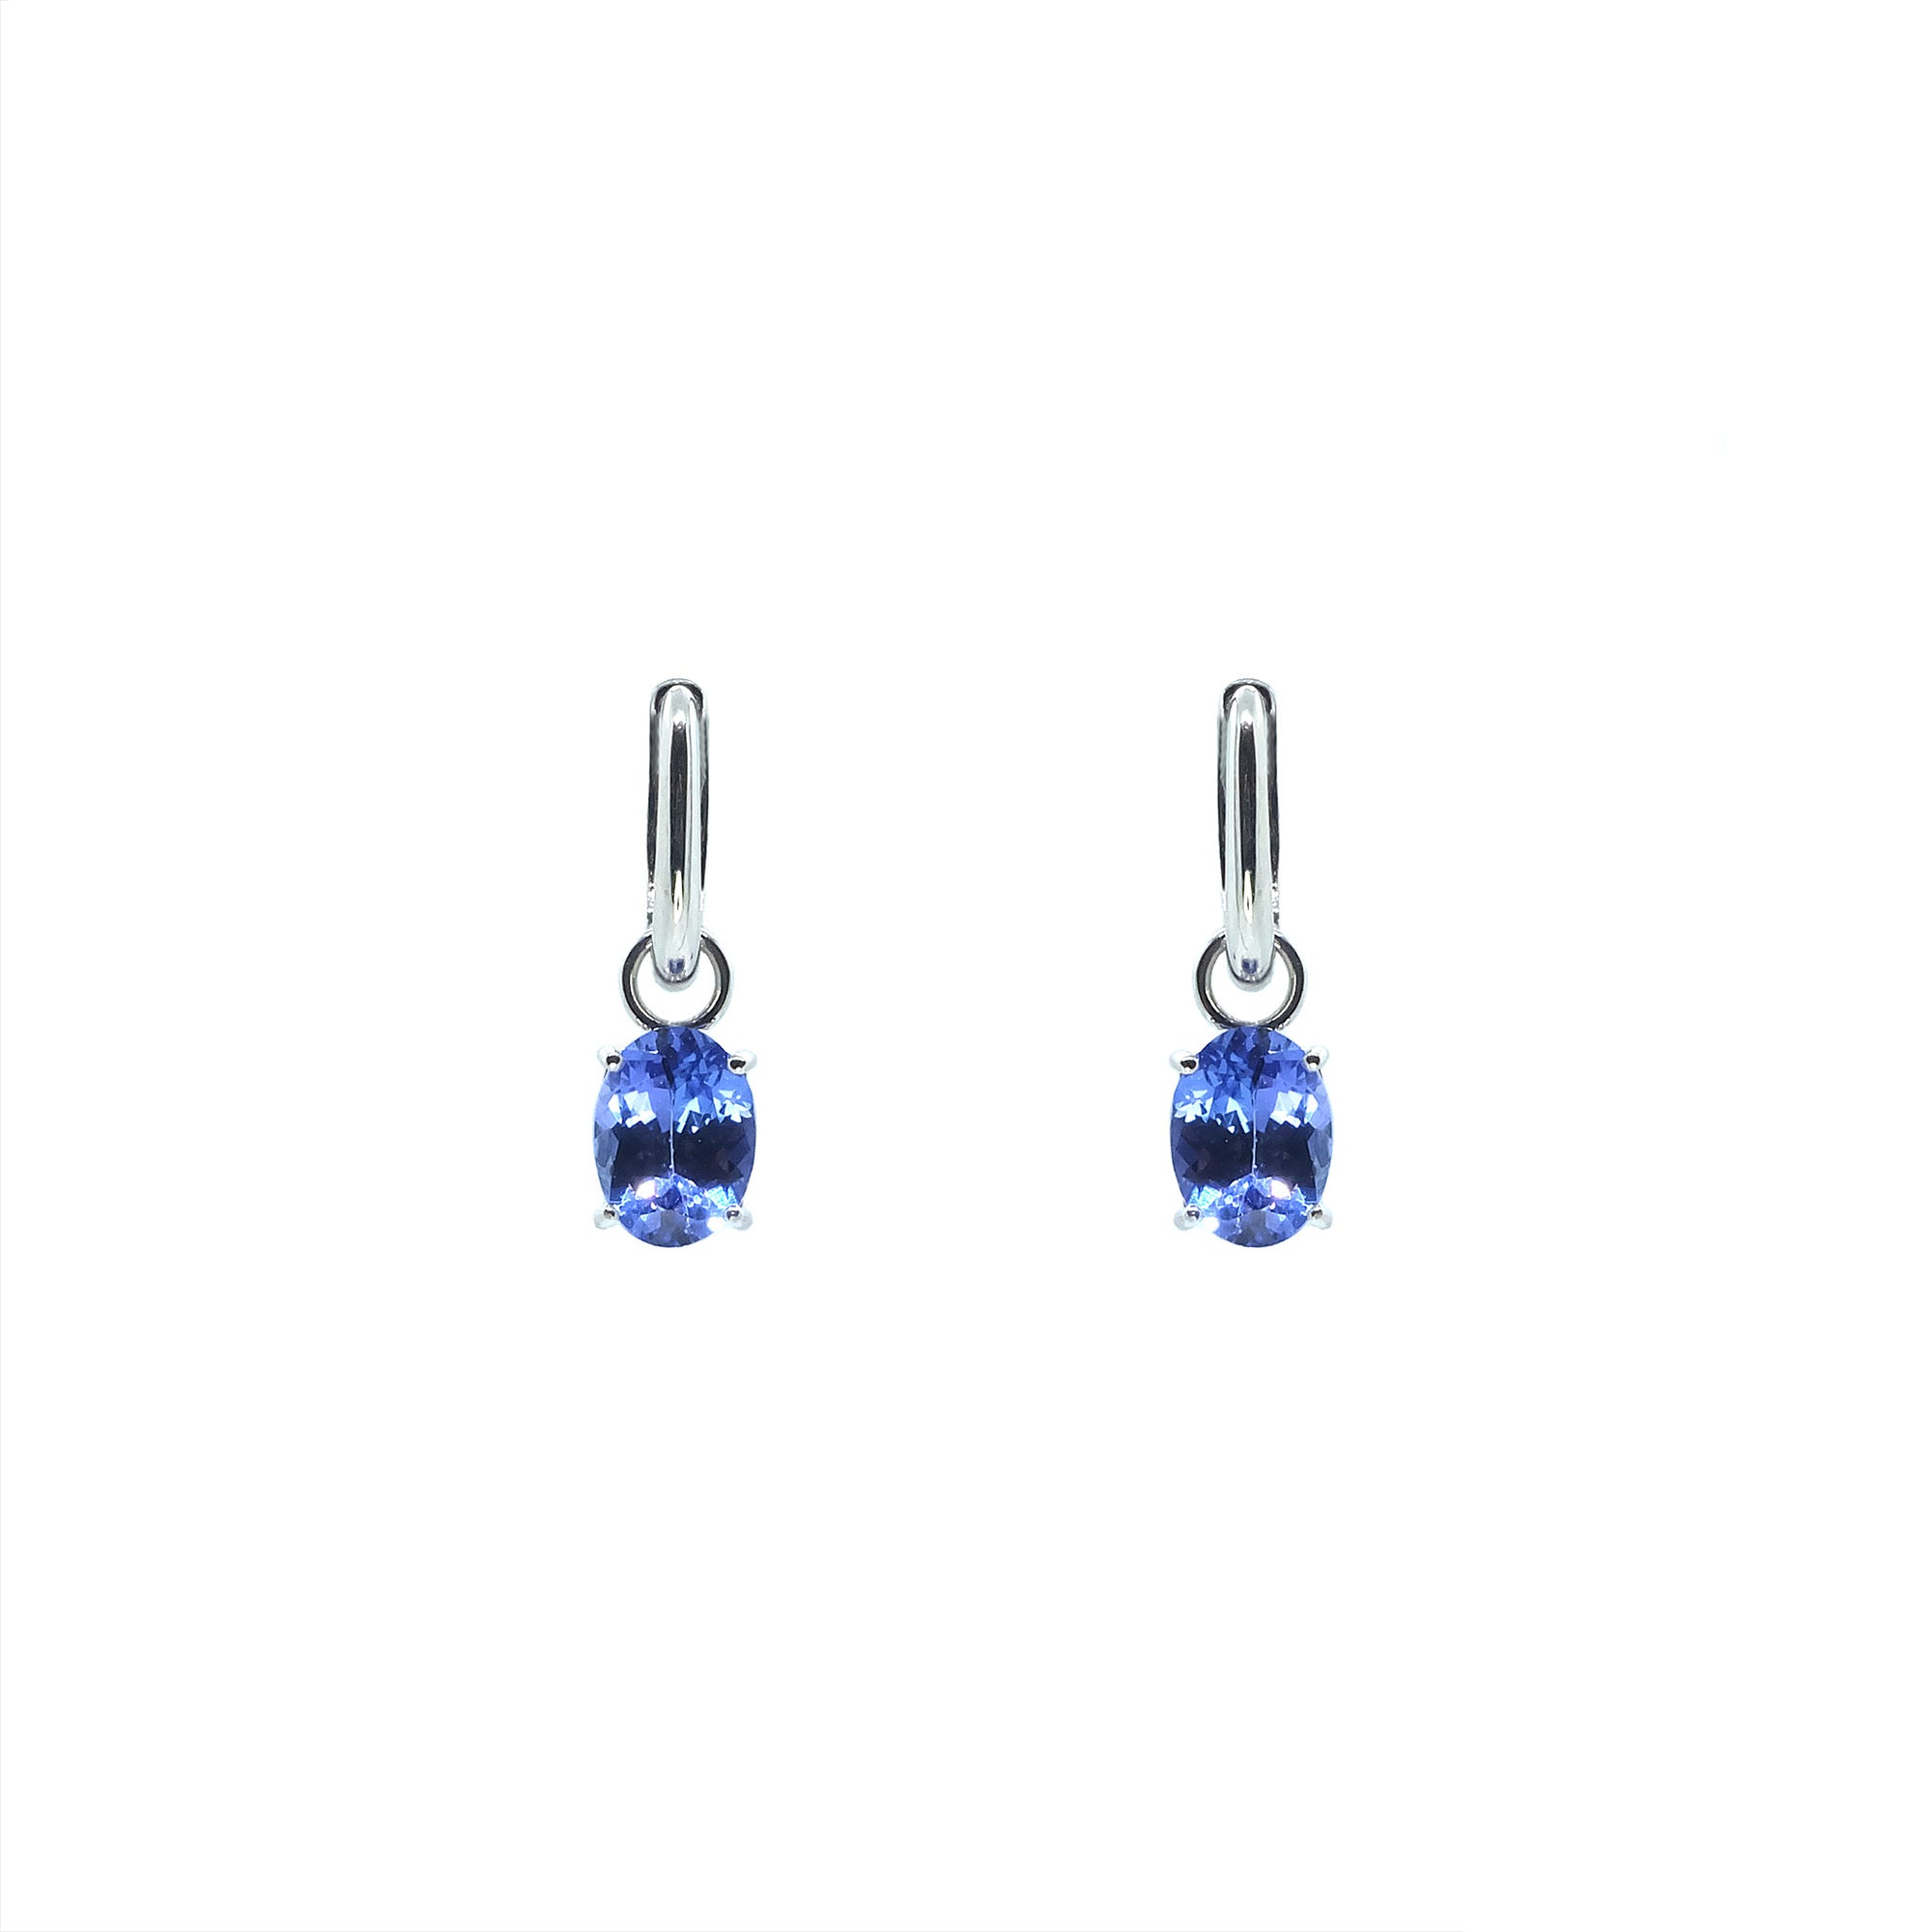 Chandy Solitaire Detachable Earrings - Tanzanite Oval 2021-014